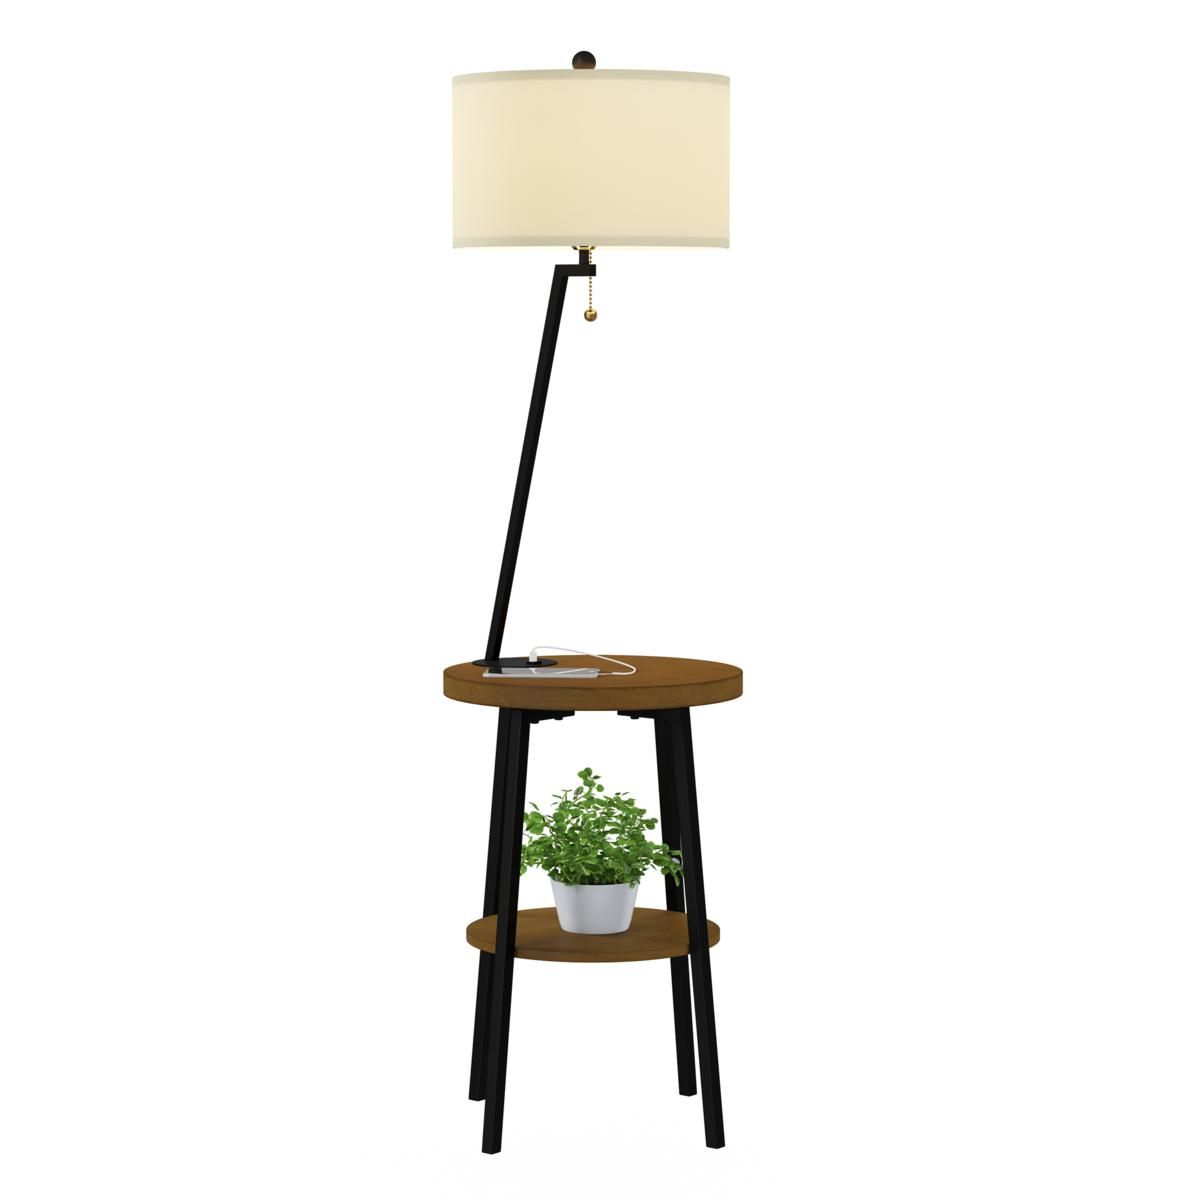 Hastings Home 2 Tier End Table Floor Lamp With Usb Port  Black & Brown –  20434415 | Hsn Intended For Floor Lamps With 2 Tier Table (View 13 of 20)